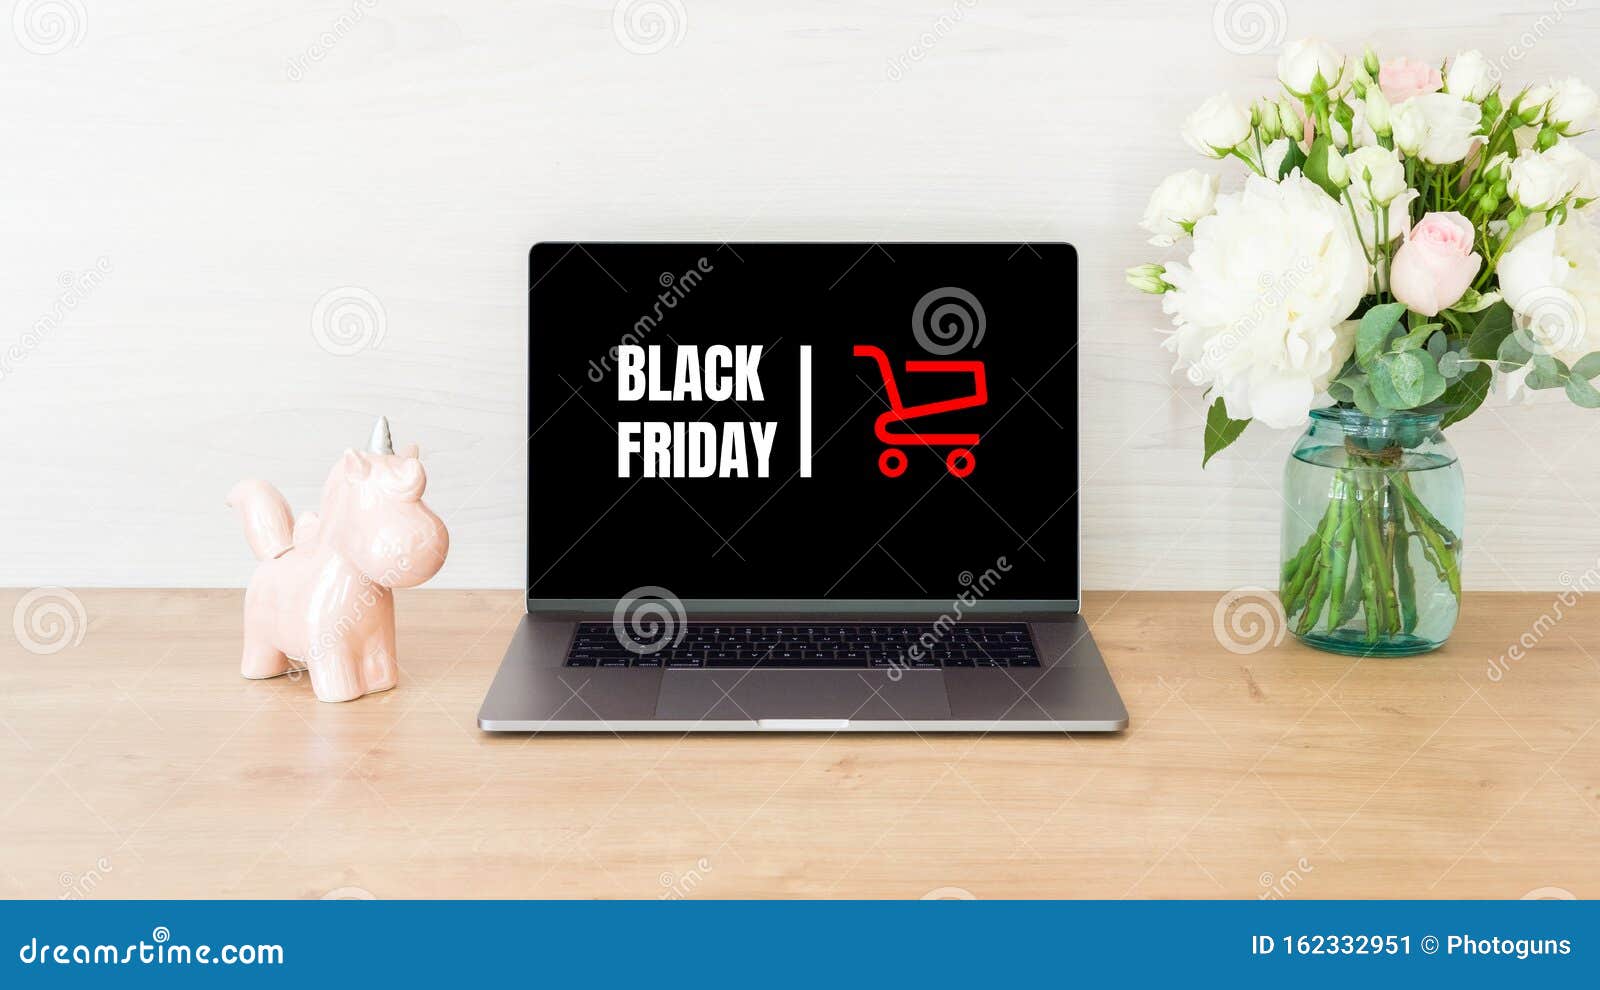 Black Friday Concept Laptop Computer Screen With Shopping Card